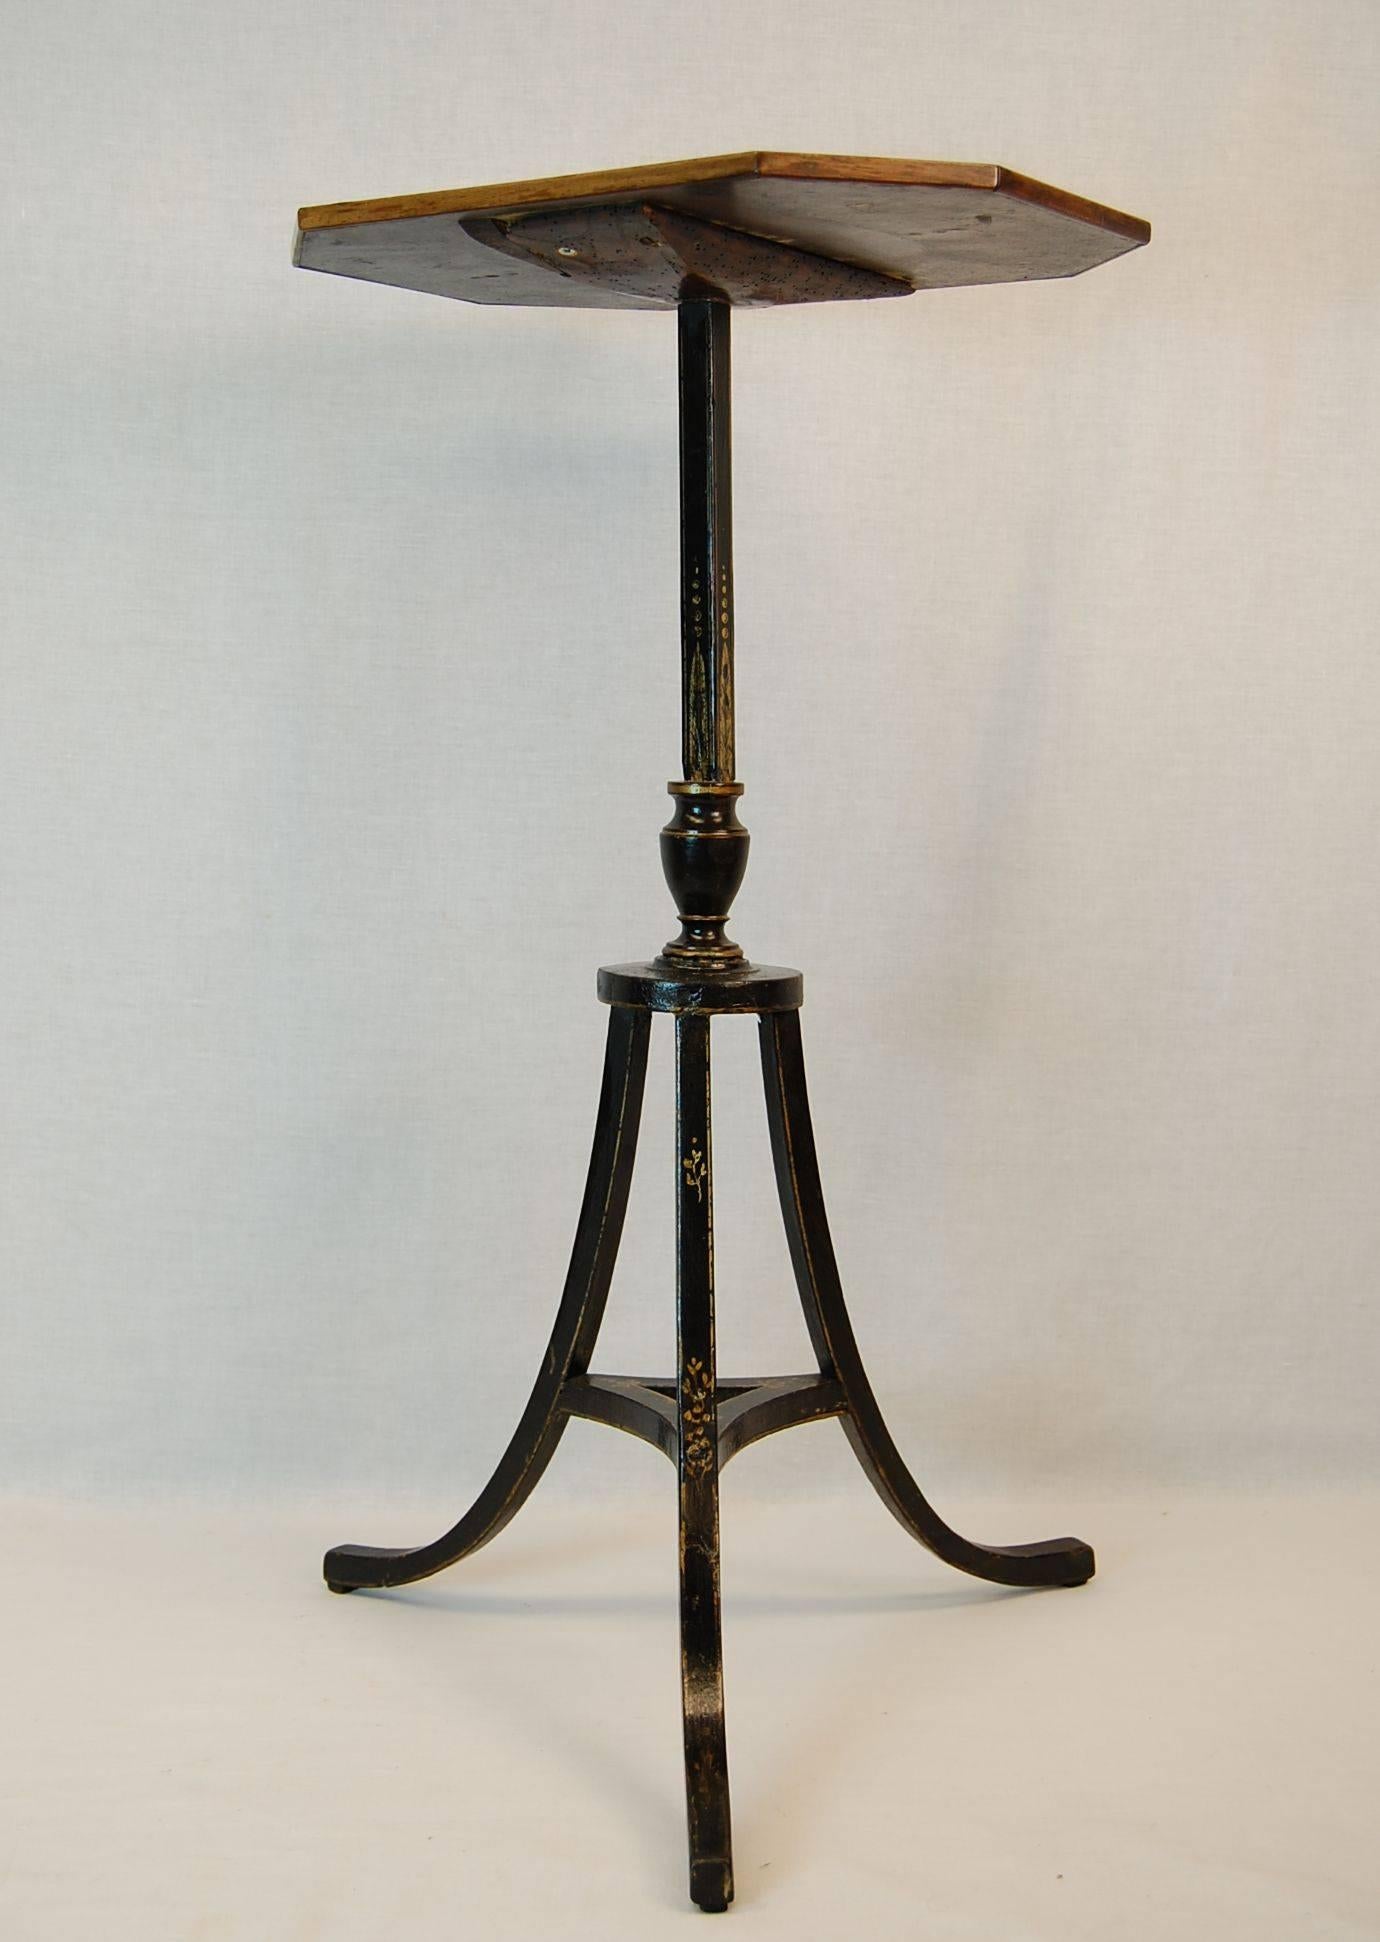 Mahogany hexagonal top with black painted and gold decorated tripod base, this is an original table, not a fire screen stand attached to a later top.